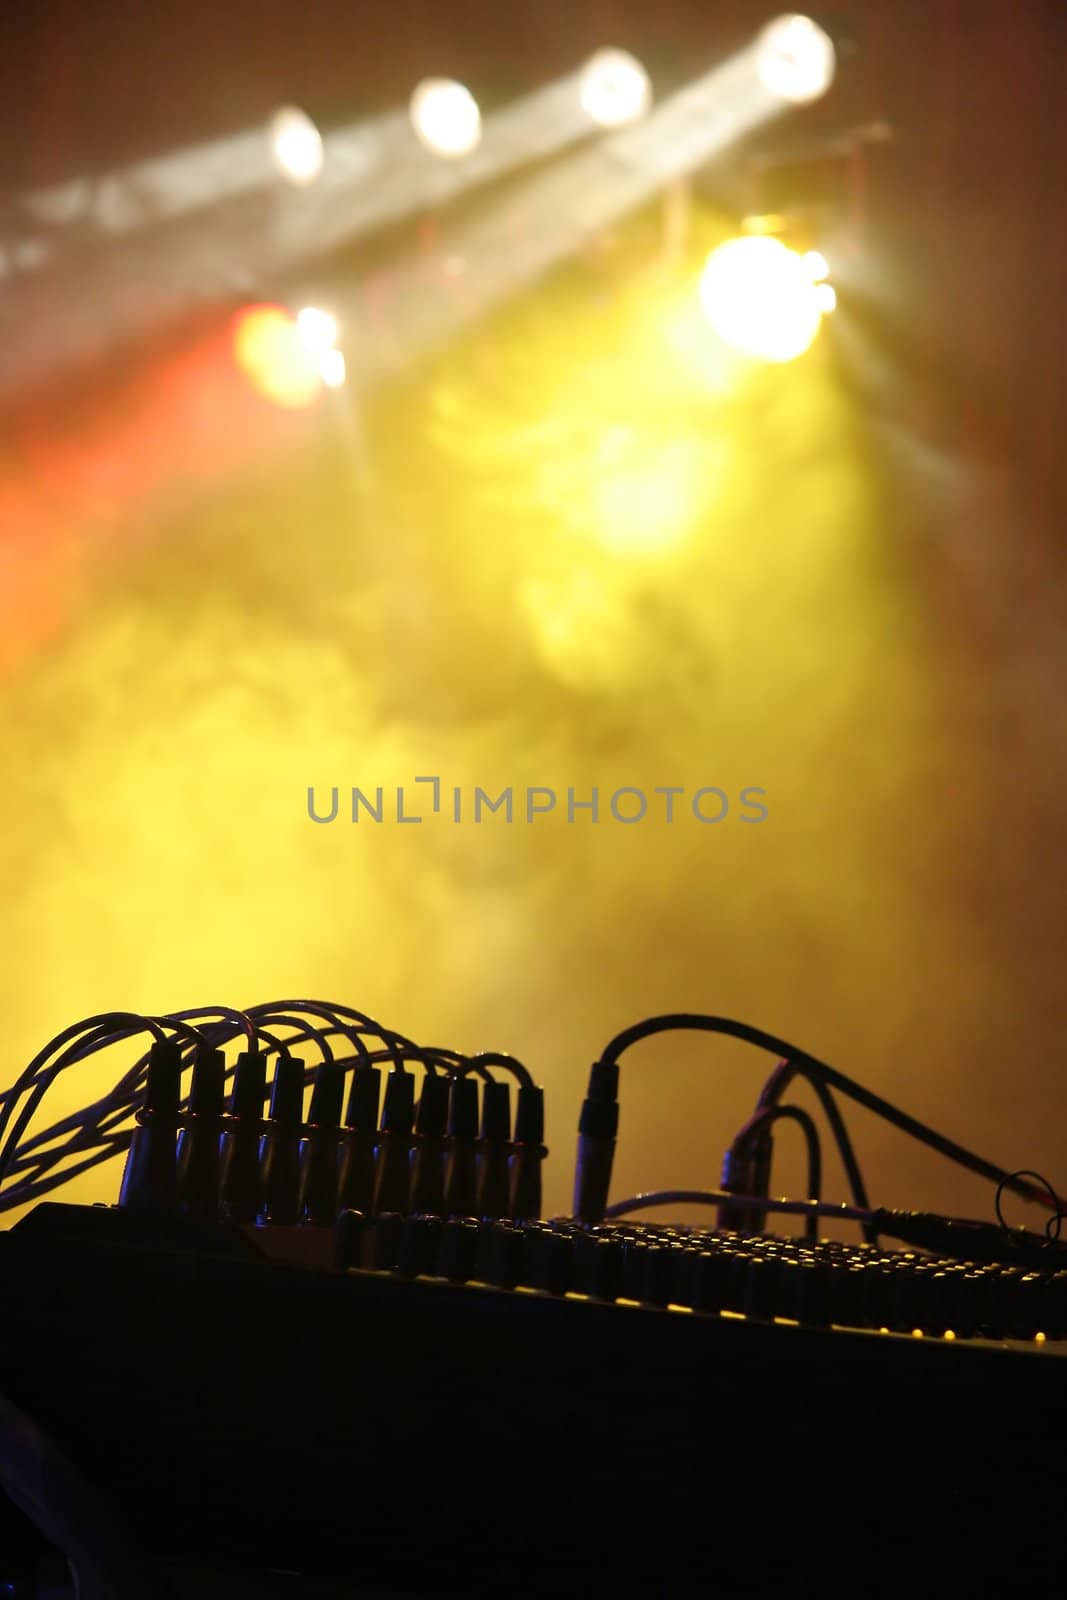 silhouette of music instrument during a concert, lights and fog in background, simple photo